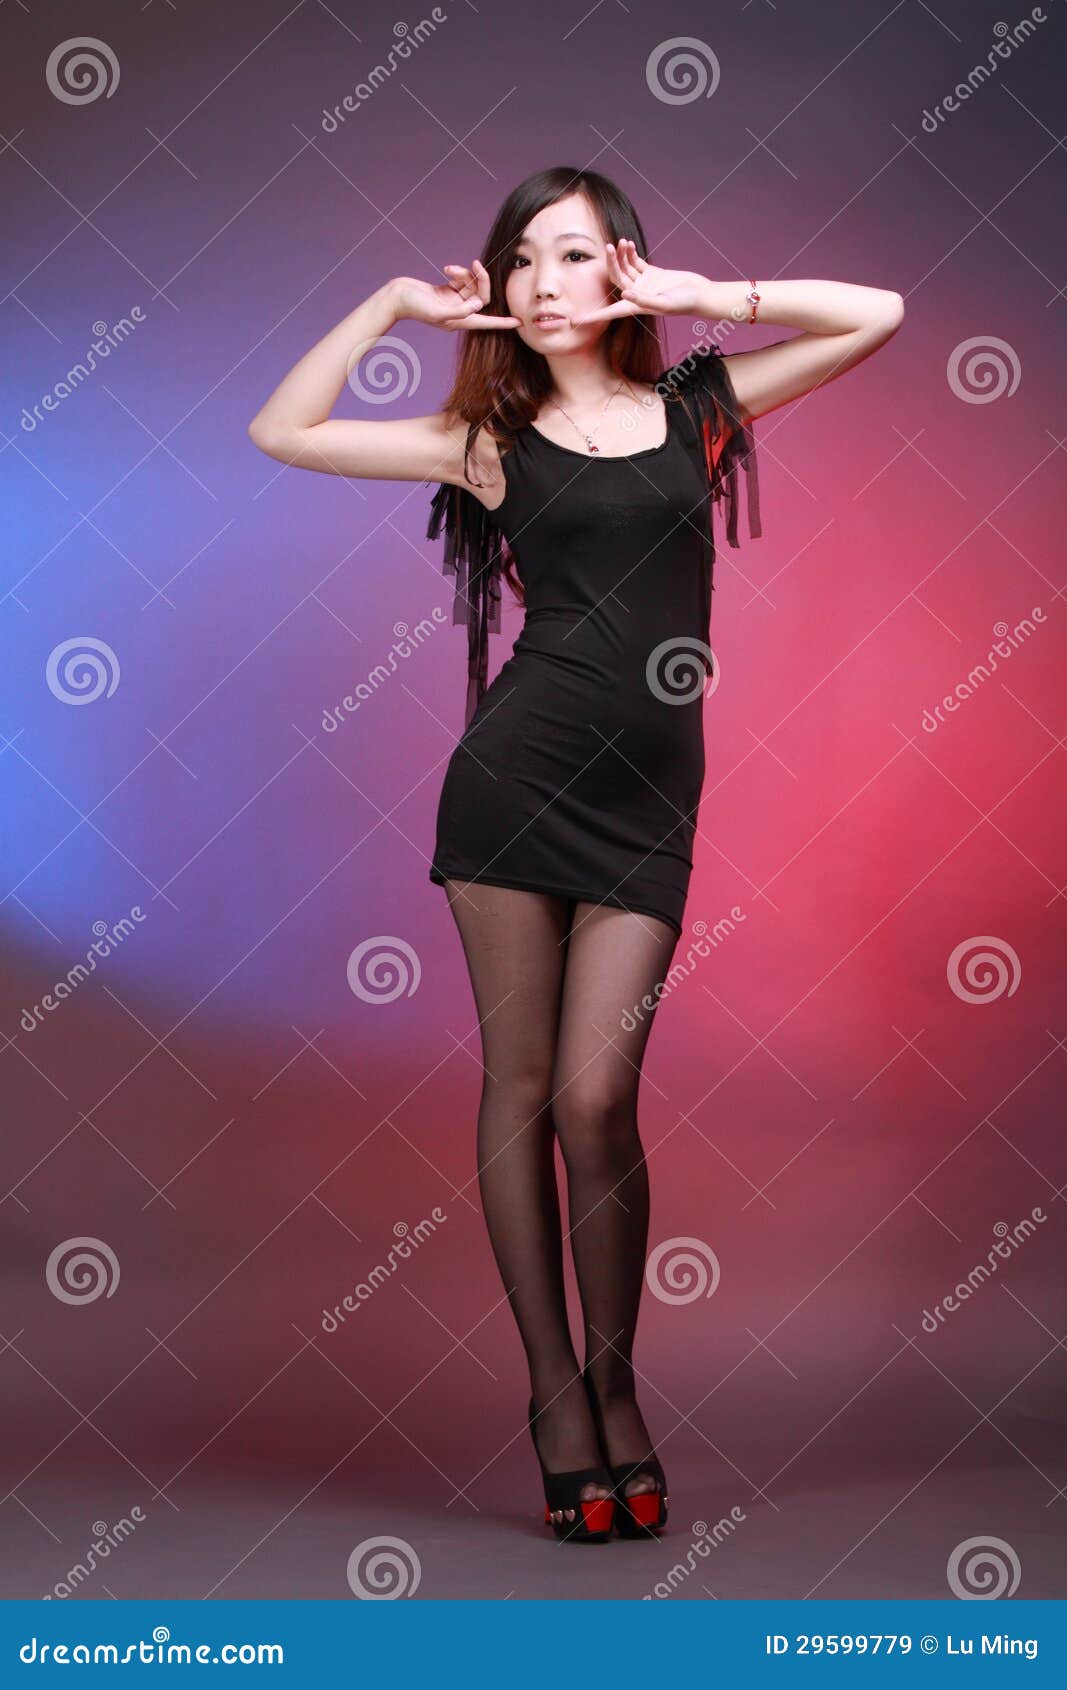 Sexy Woman In Various Fun Poses Royalty Free Stock Images Image 29599779